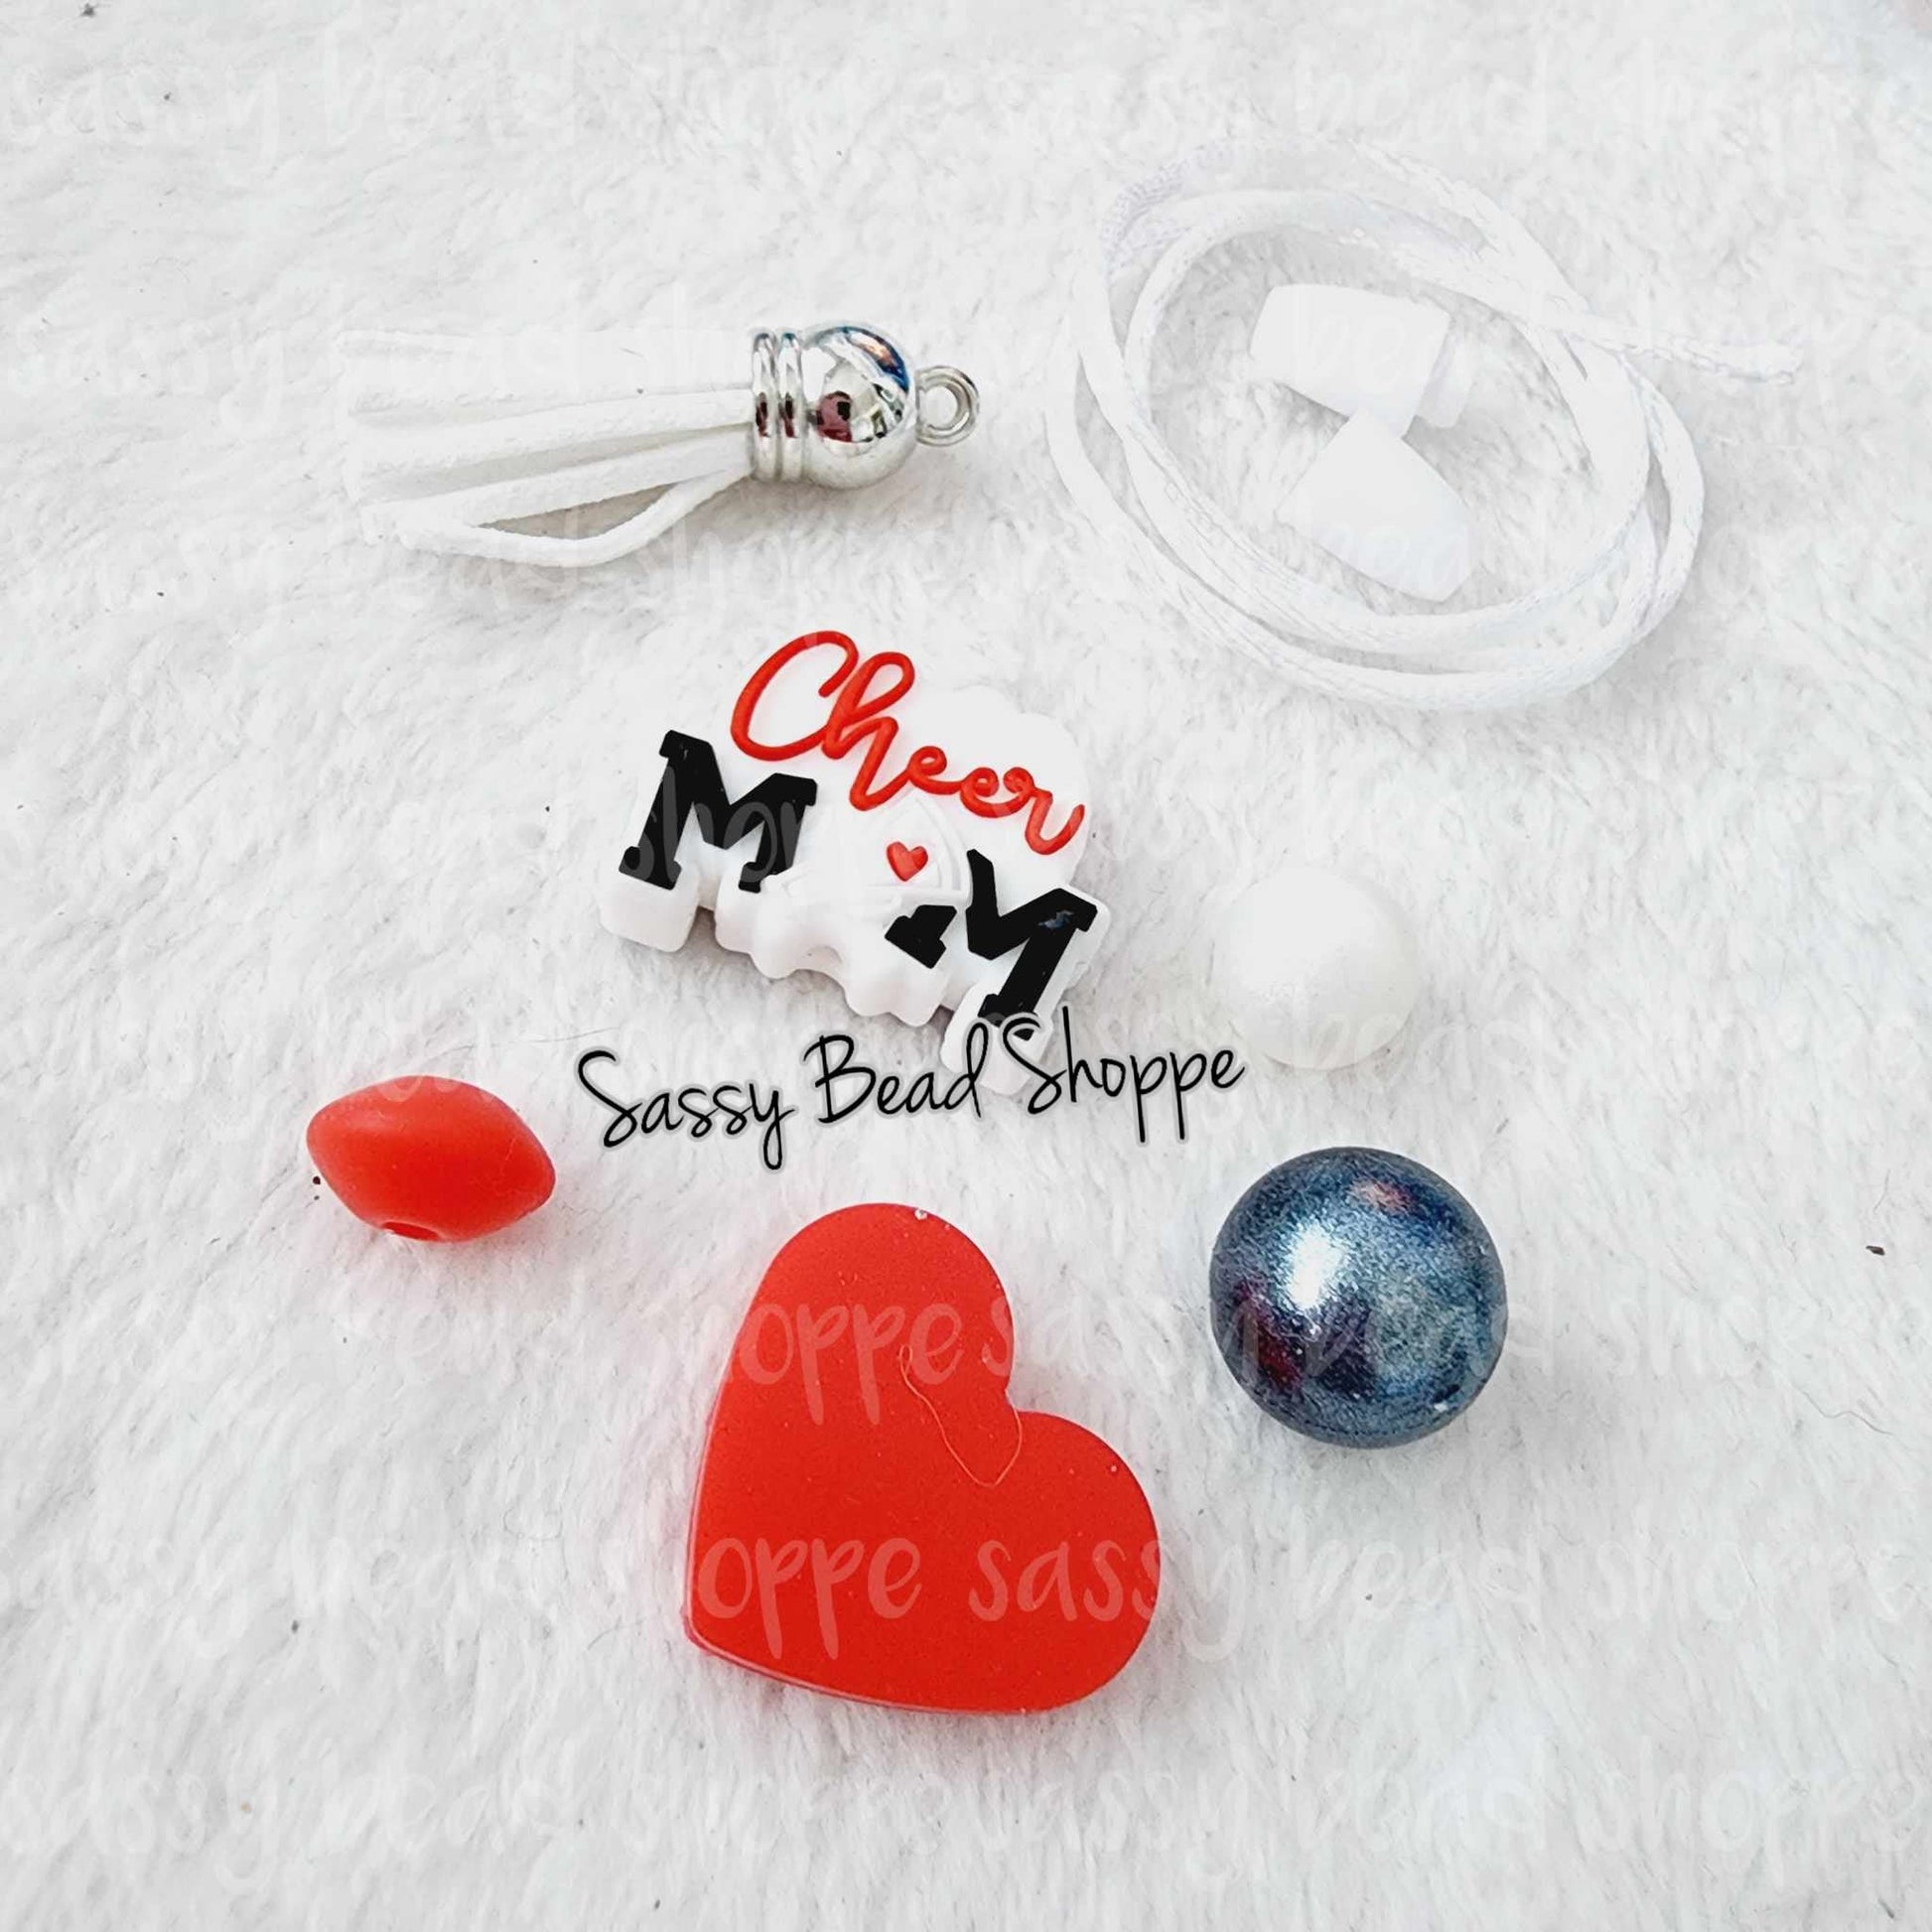 Sassy Bead Shoppe Cheer Sports Mom Car Charm What you will receive in your kit